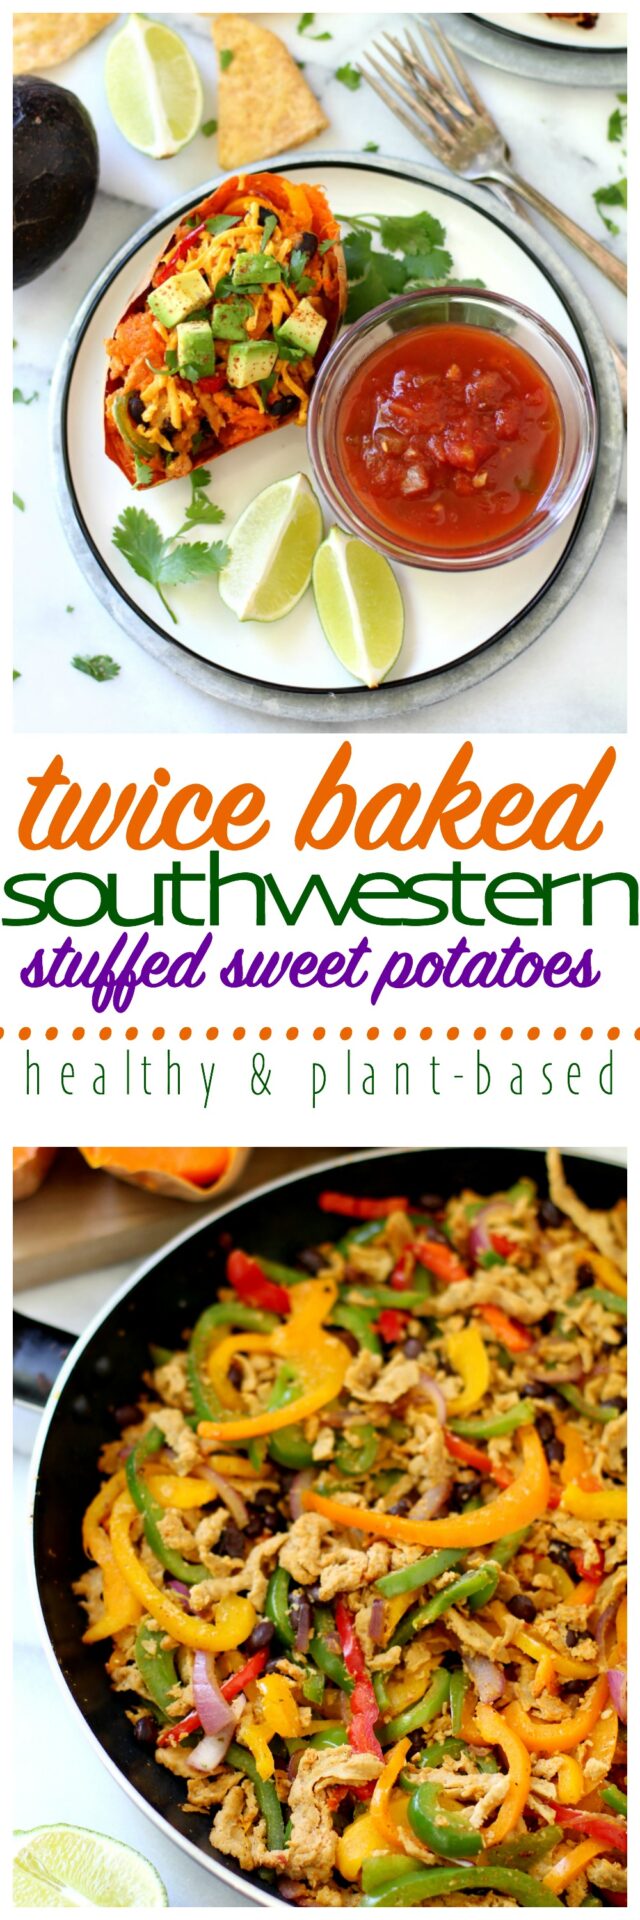 Twice Baked Southwestern Stuffed Sweet Potatoes are loaded with protein and healthy stuff, but still taste amazing to the pickiest of eaters!